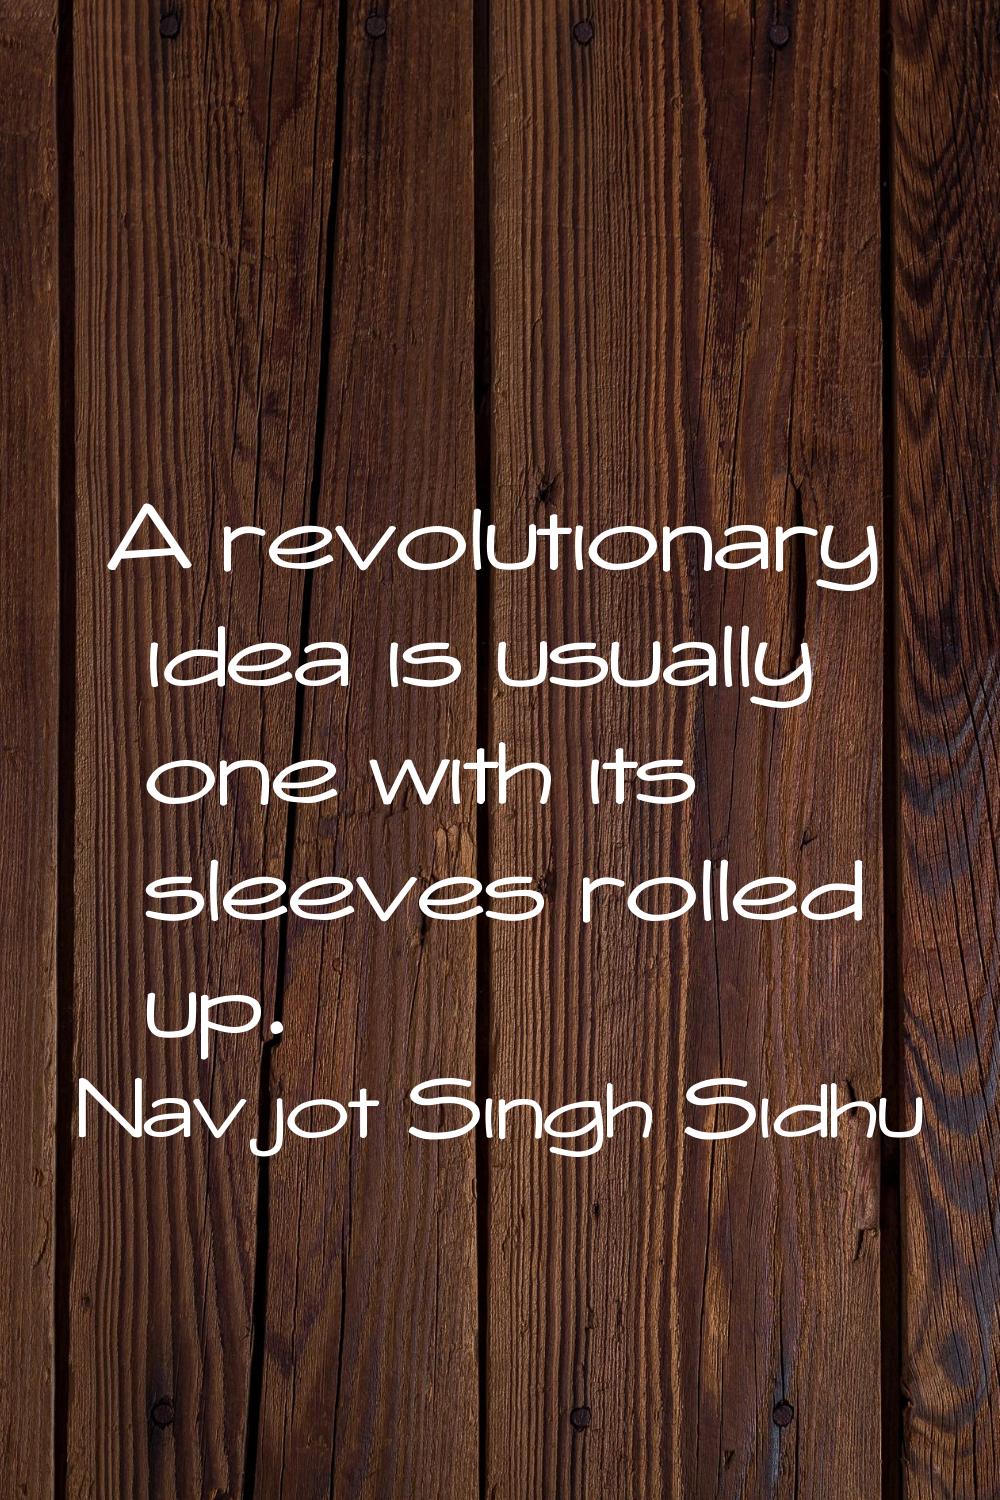 A revolutionary idea is usually one with its sleeves rolled up.